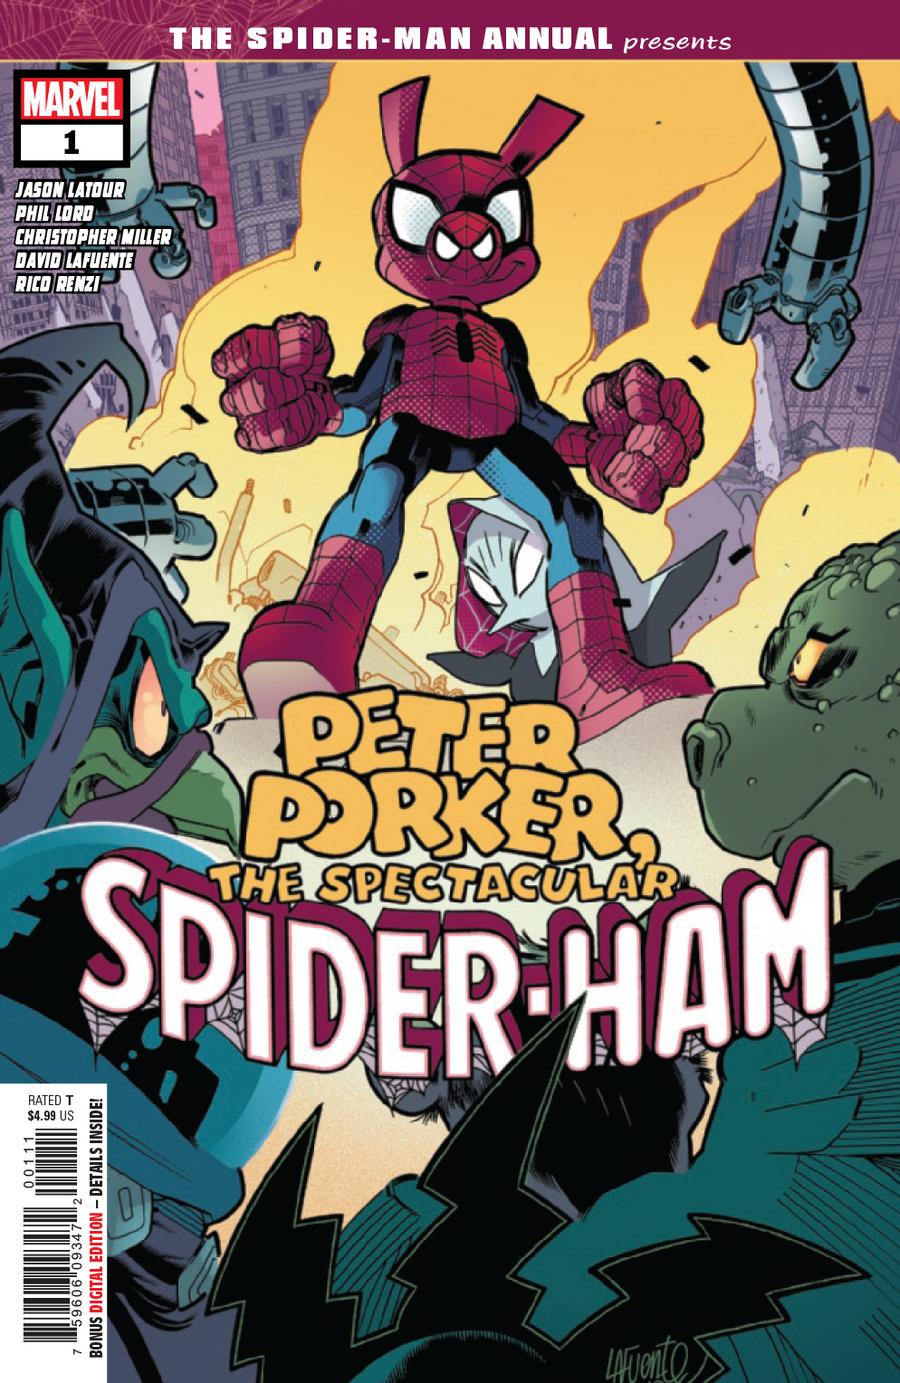 Spider-Man Featuring Spider-Ham Annual #1 Cover A 1st Ptg Regular David Lafuente Cover